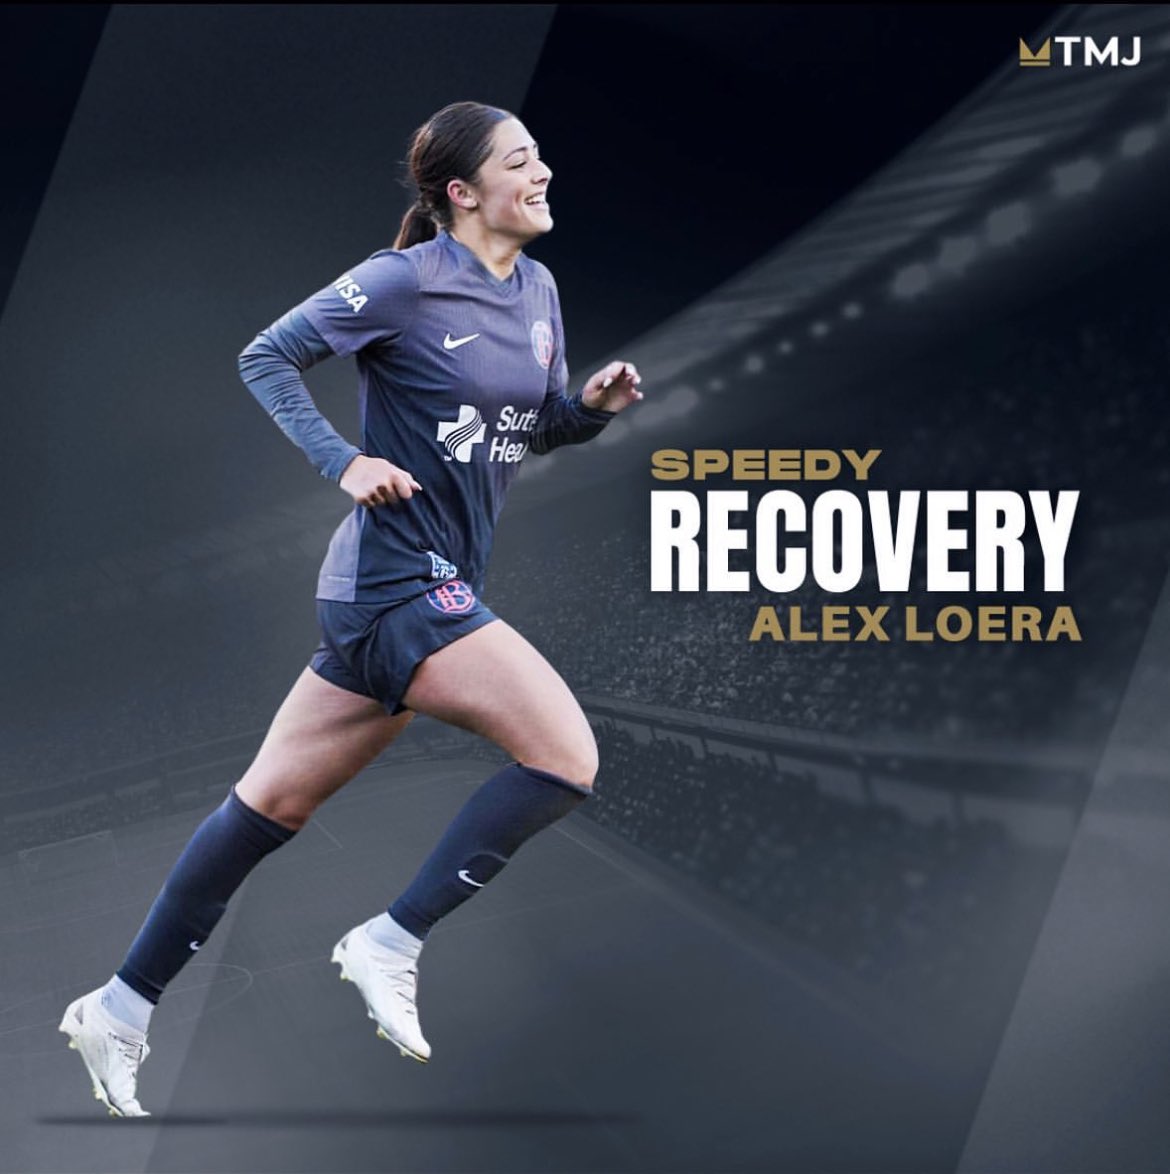 Best wishes to #TMJAthlete @alexisaloera on her Recovery 🙏 Your #TMJFamily is with you, Alex ✨